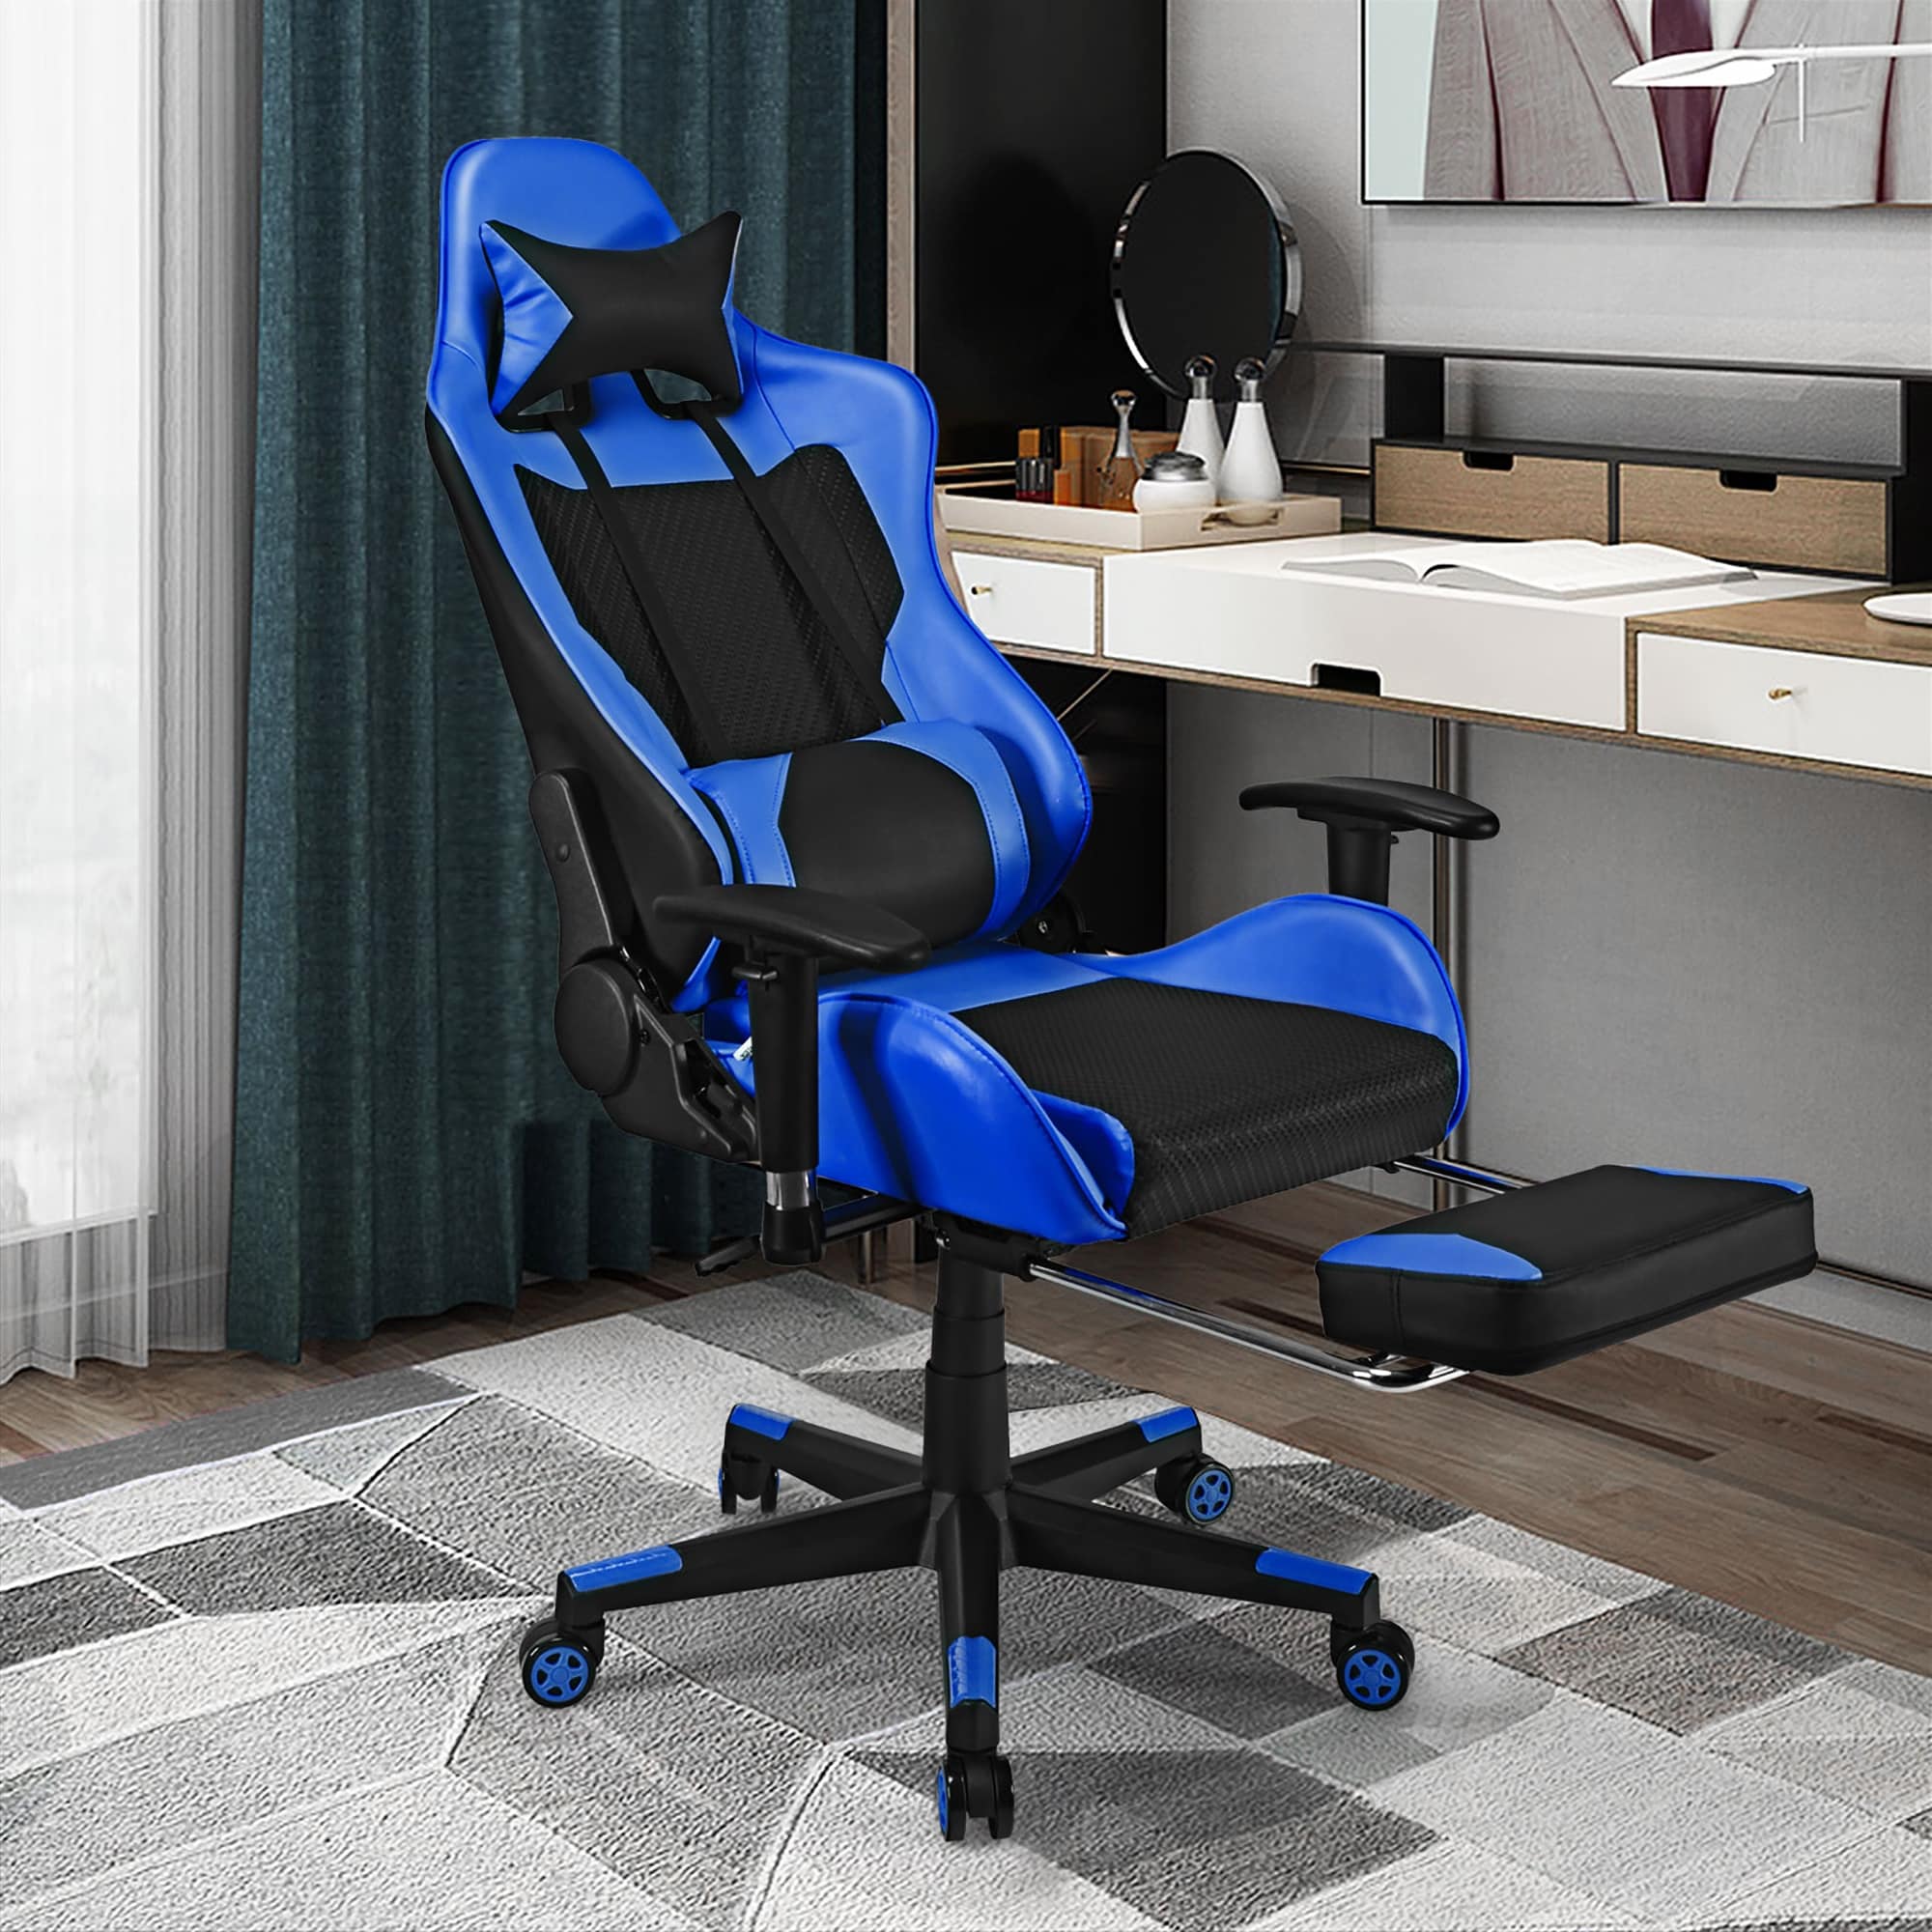 Gaming Chairs | Shop Online at Overstock